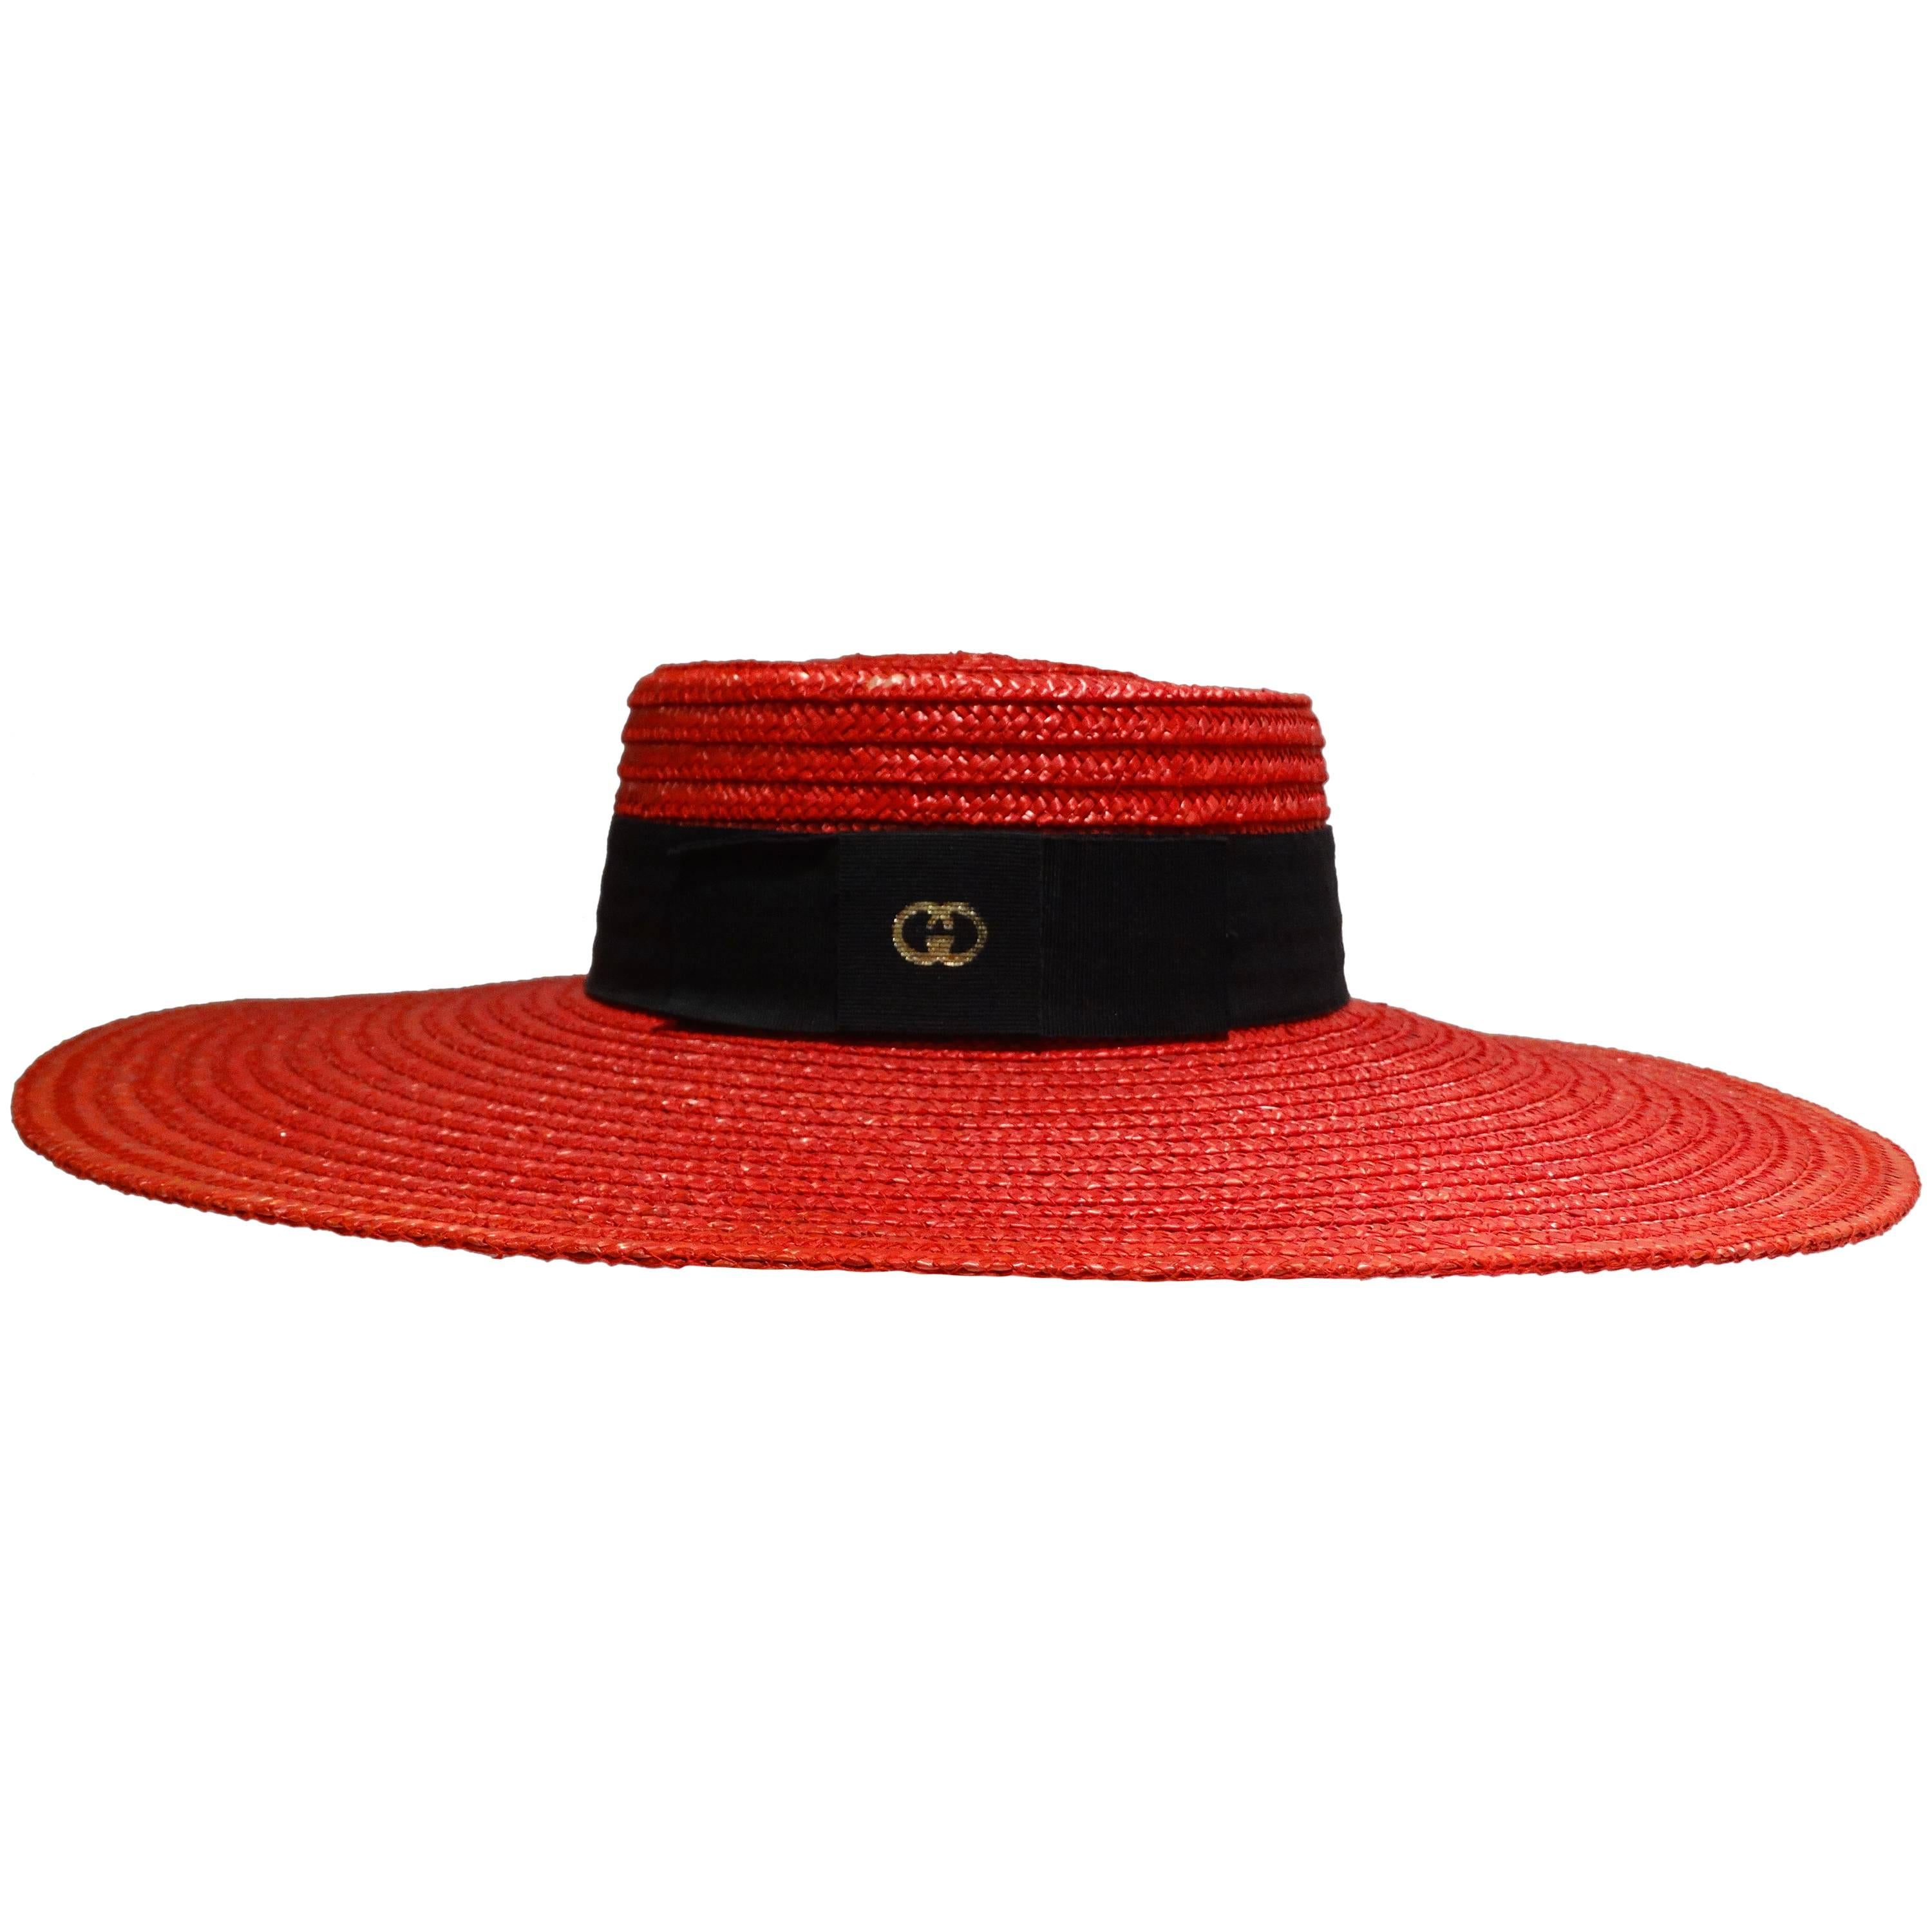 1980s Limited Edition Red "Gucci" Straw Hat 